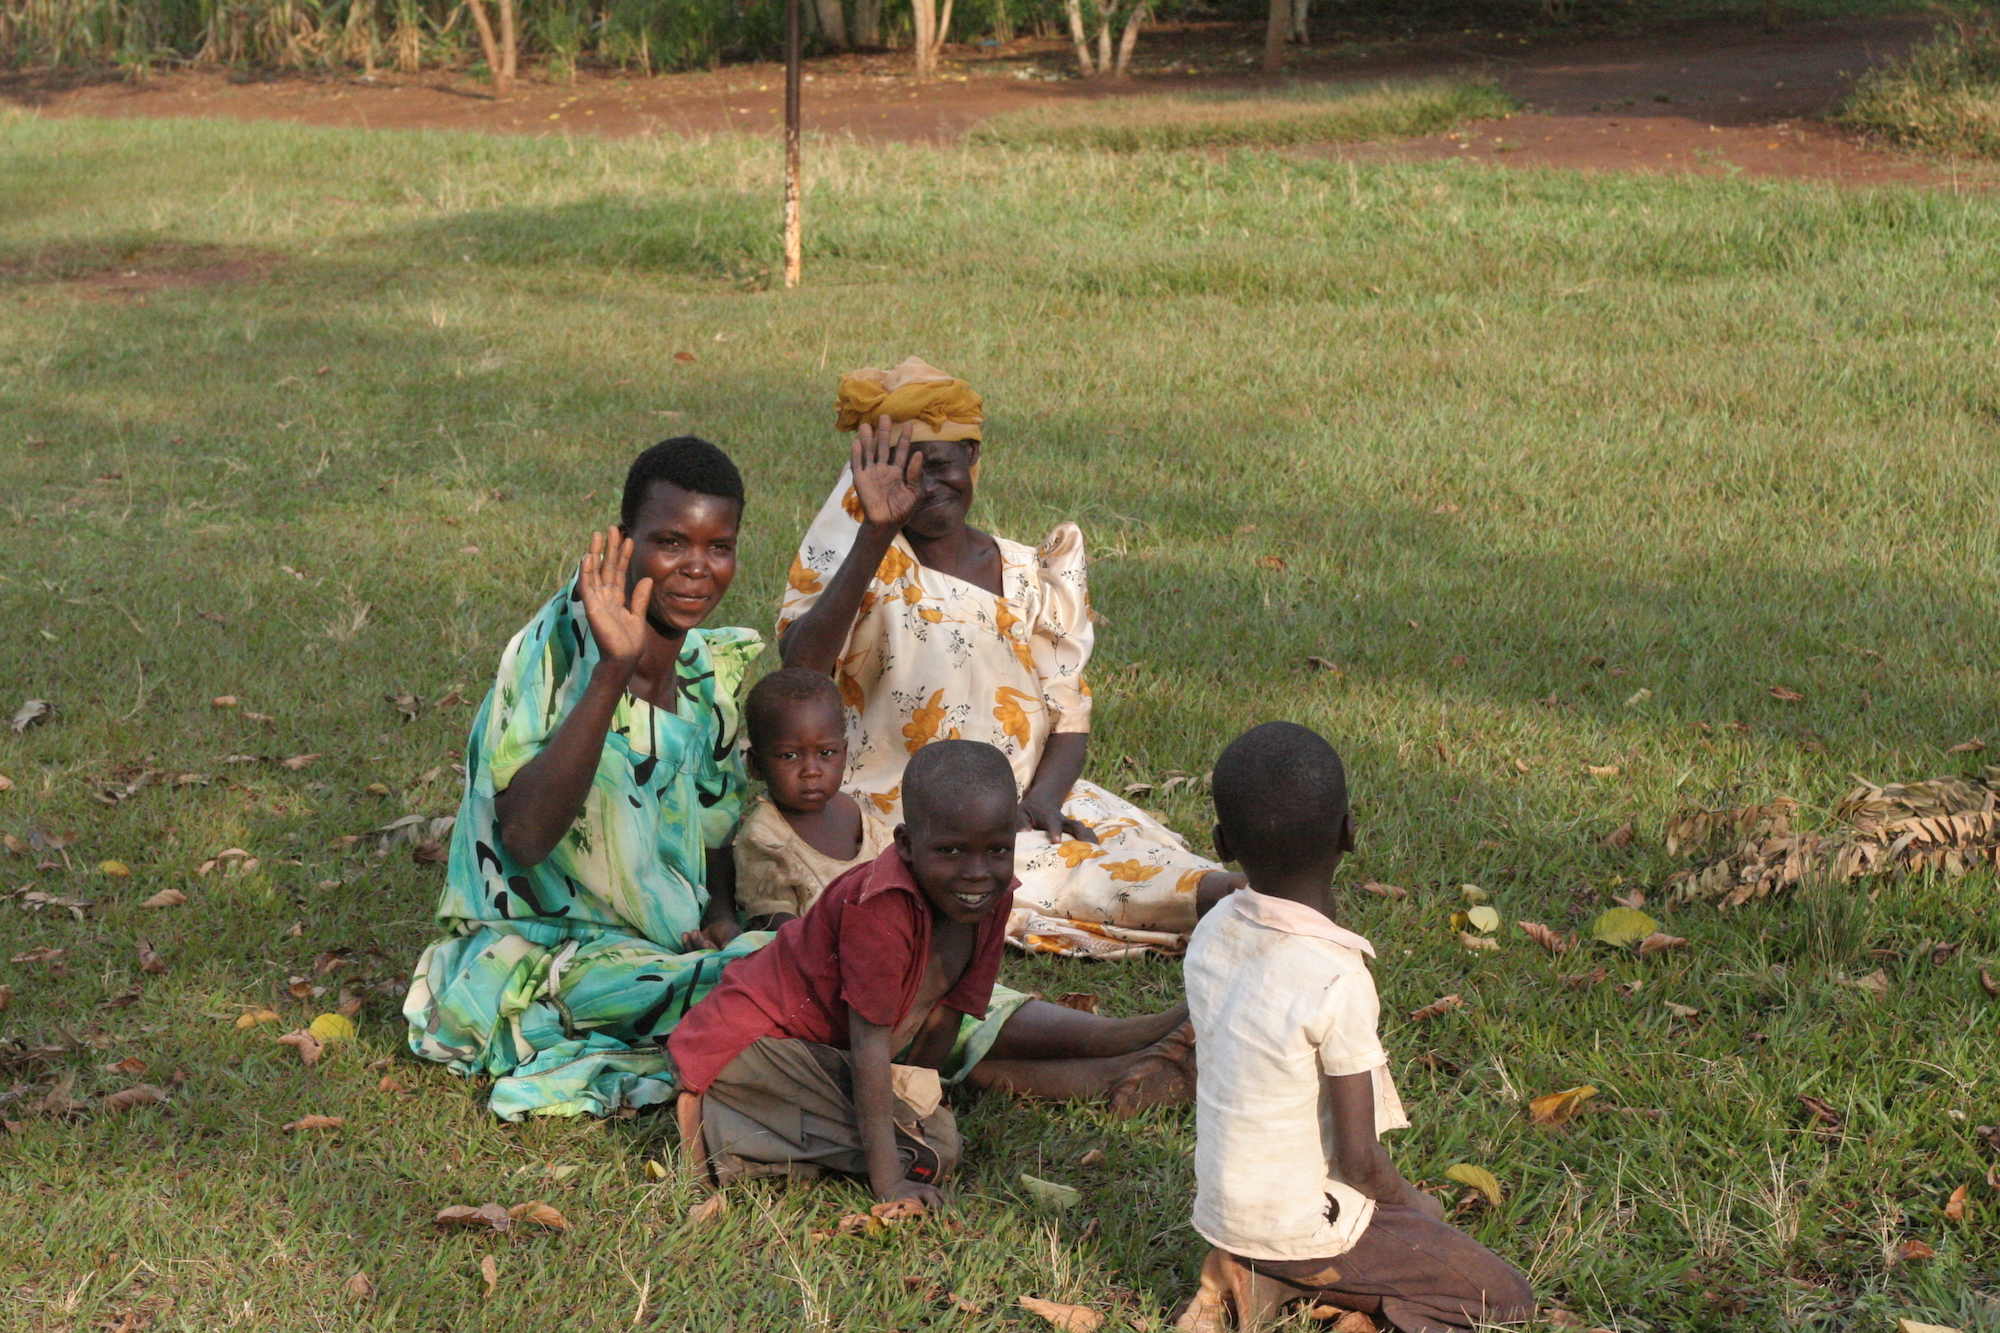 Women & children sitting on the grass, waving at the camera